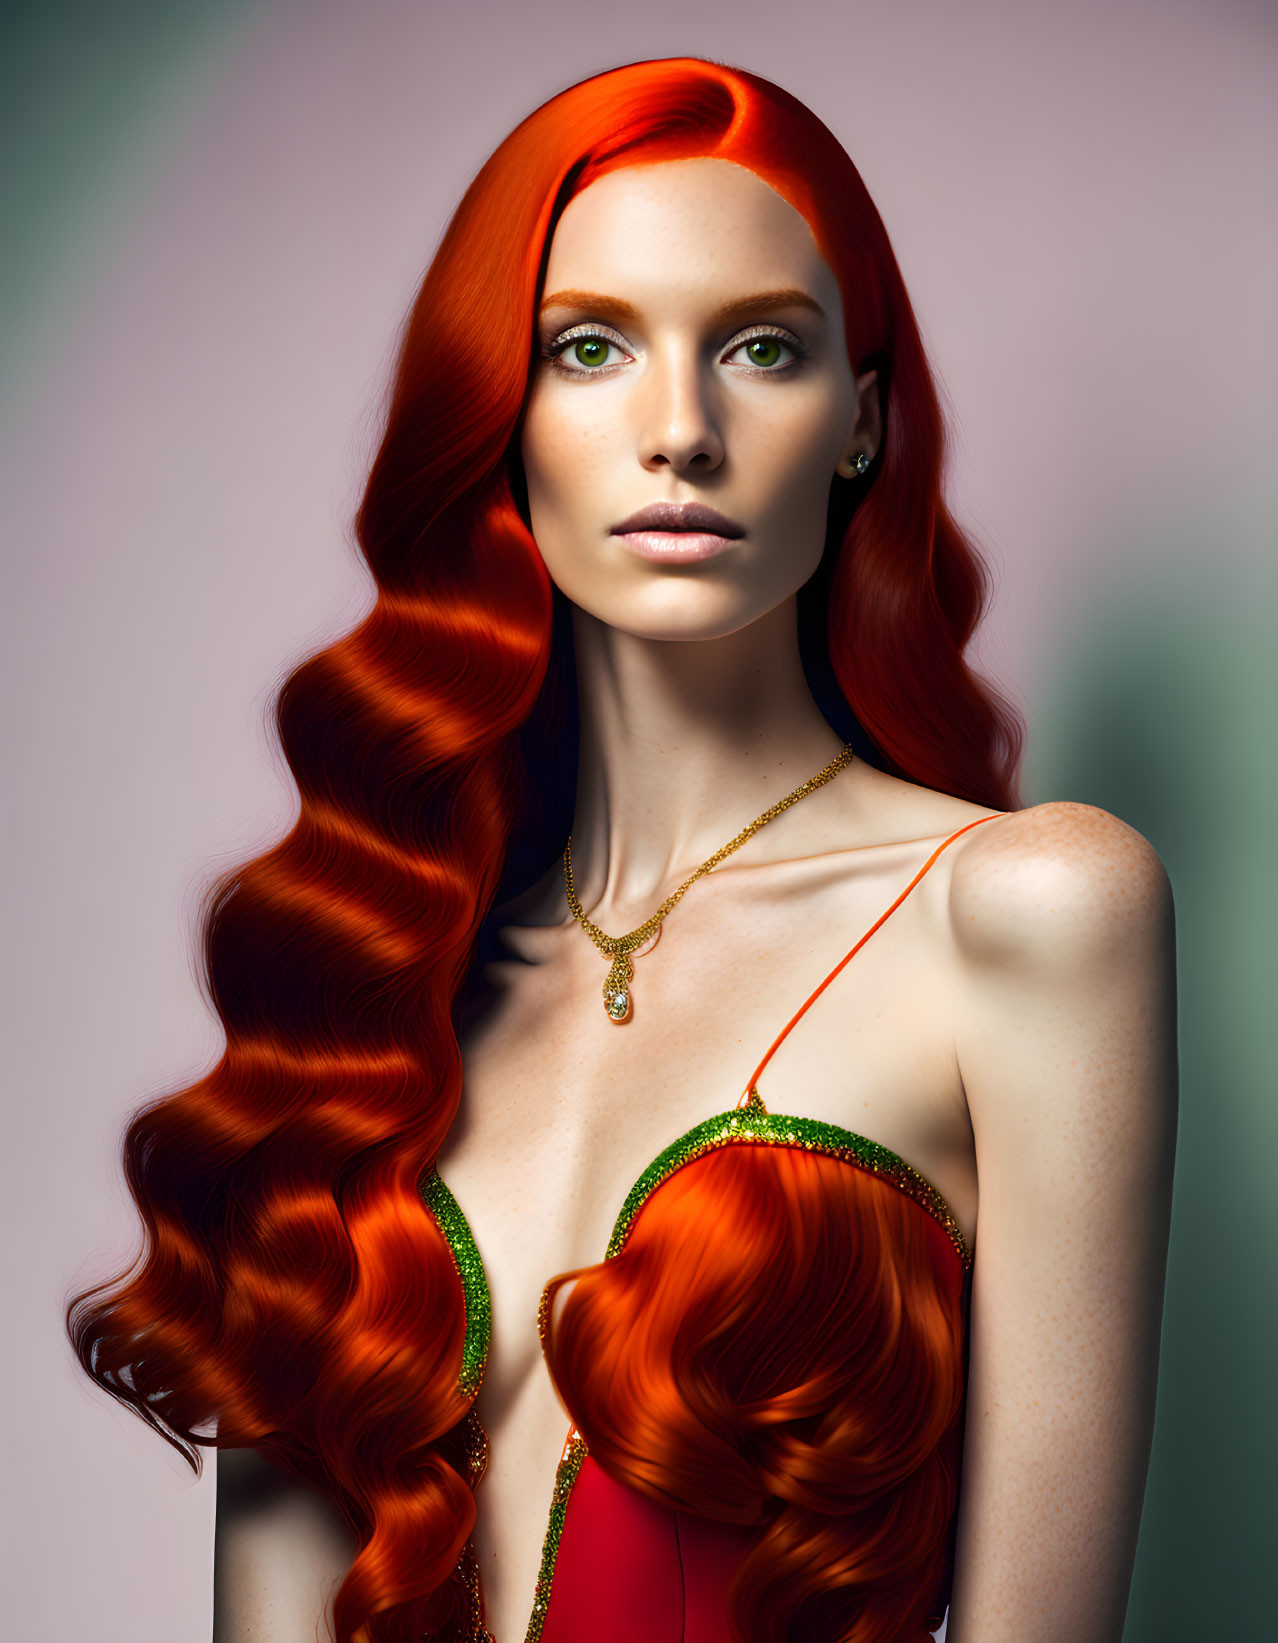 Digital portrait of a woman with red hair, green eyes, red dress, and gold necklace